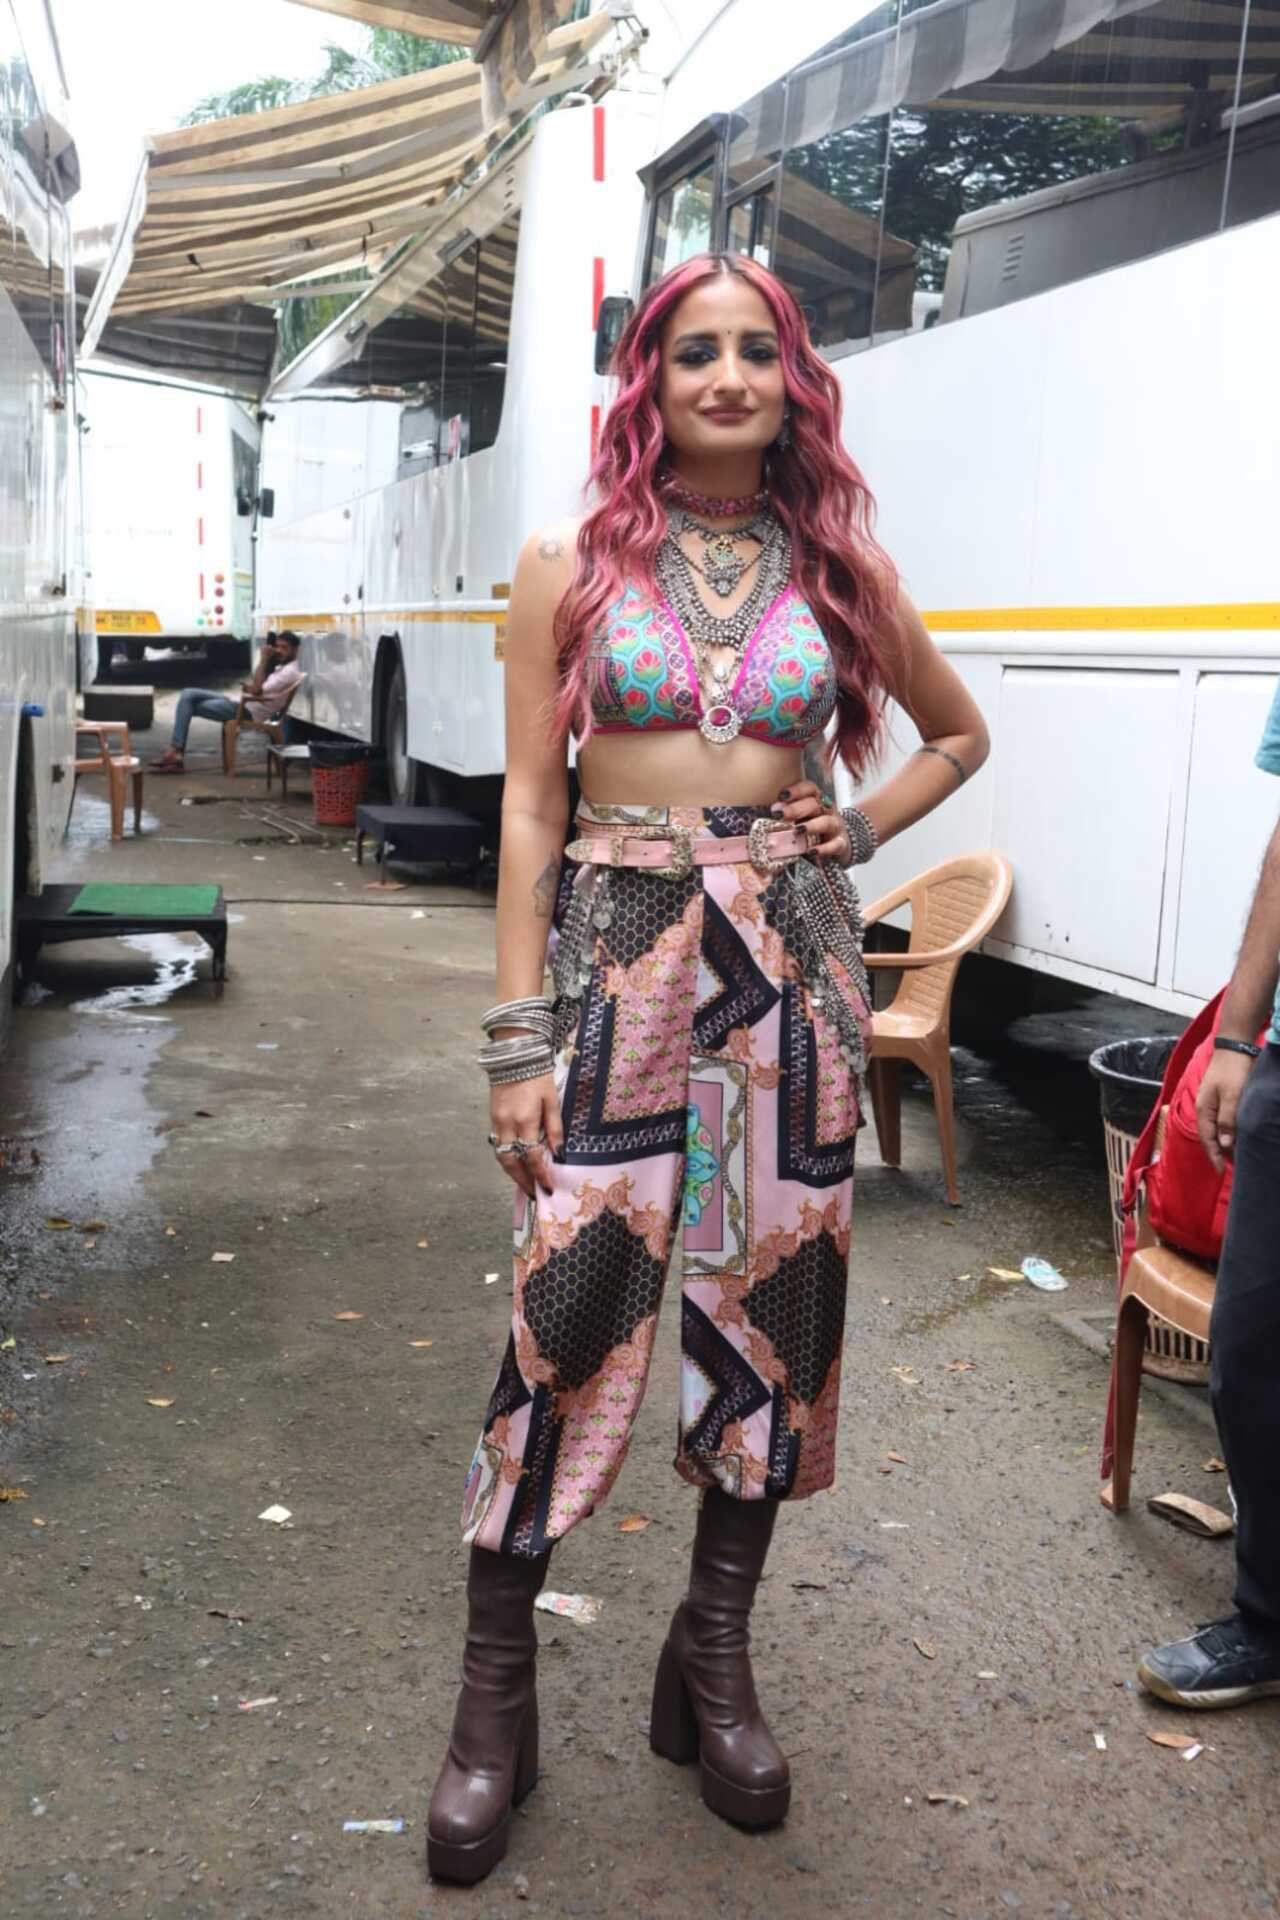 The singer wore a multicoloured abstract print outfit